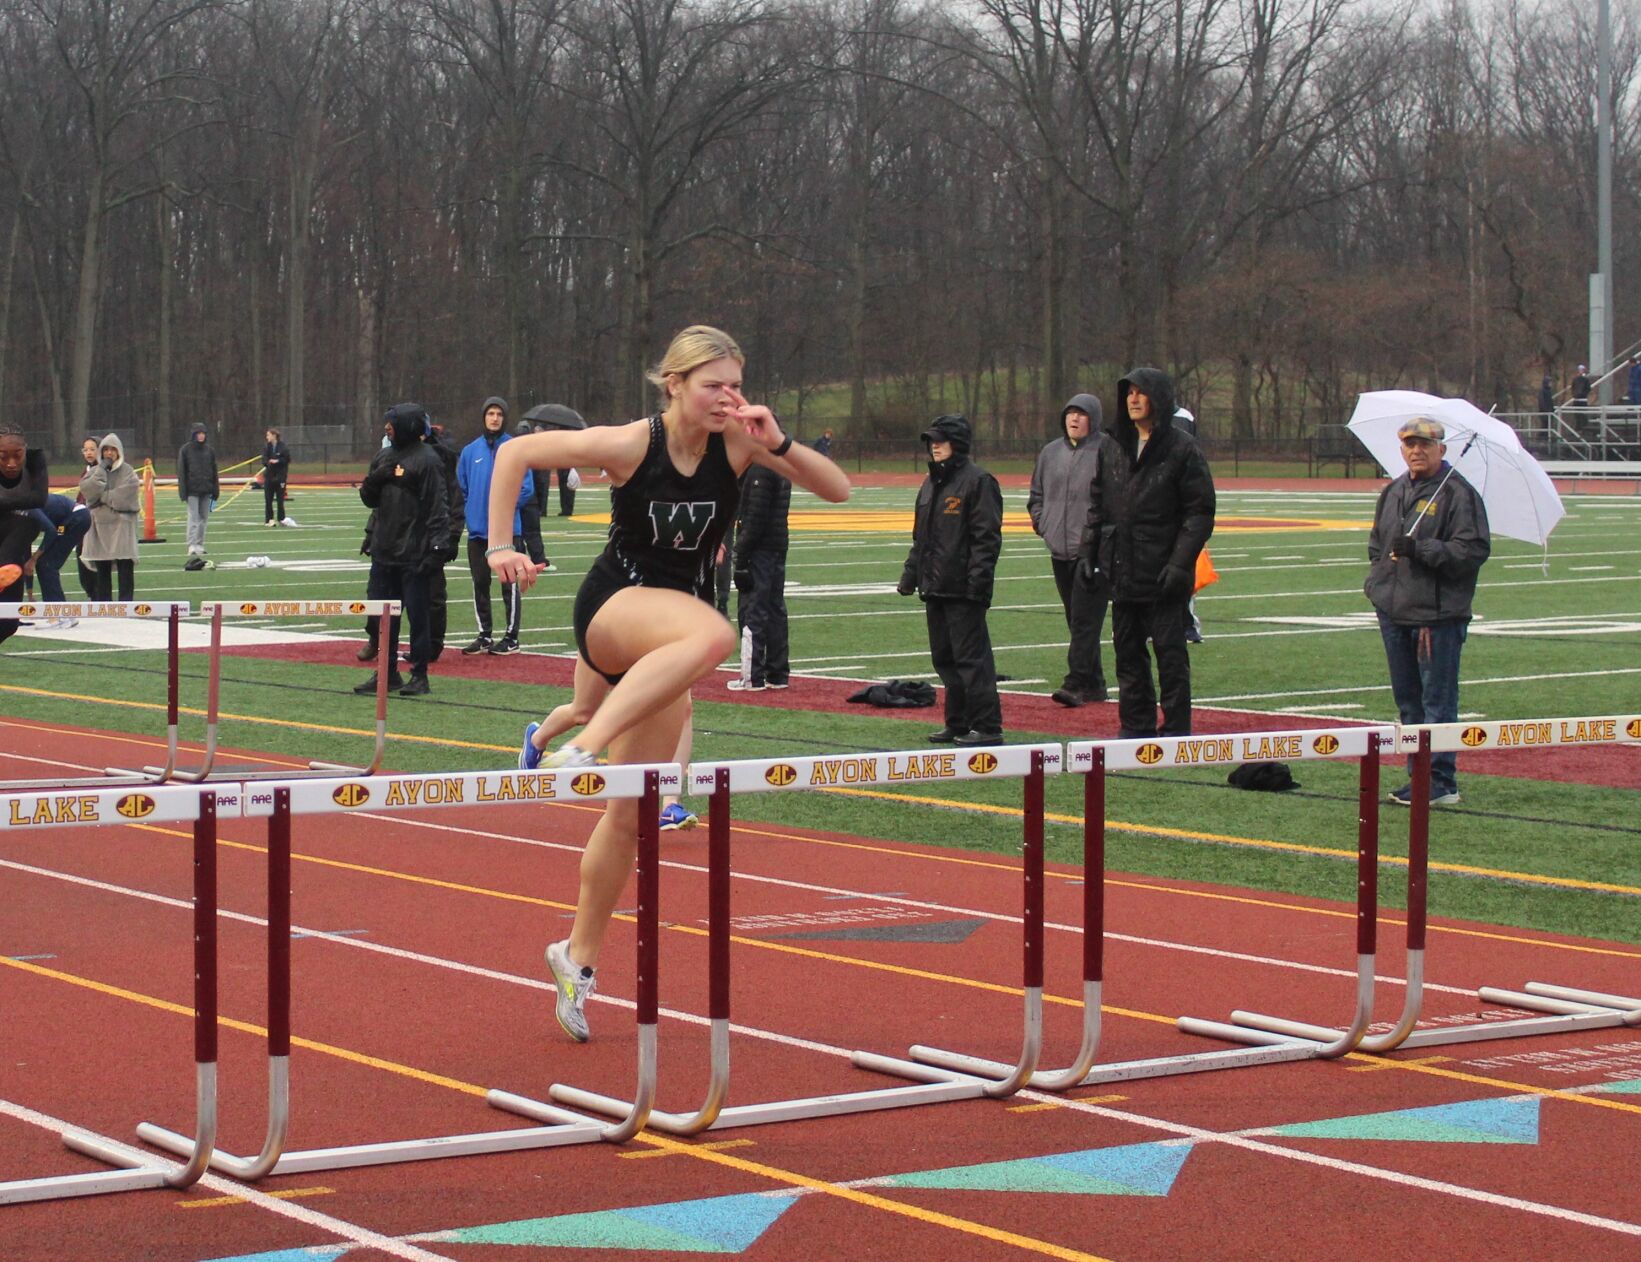 Avon Invitational Track Meet Results: Rocky River Teams Shine in Wet Conditions